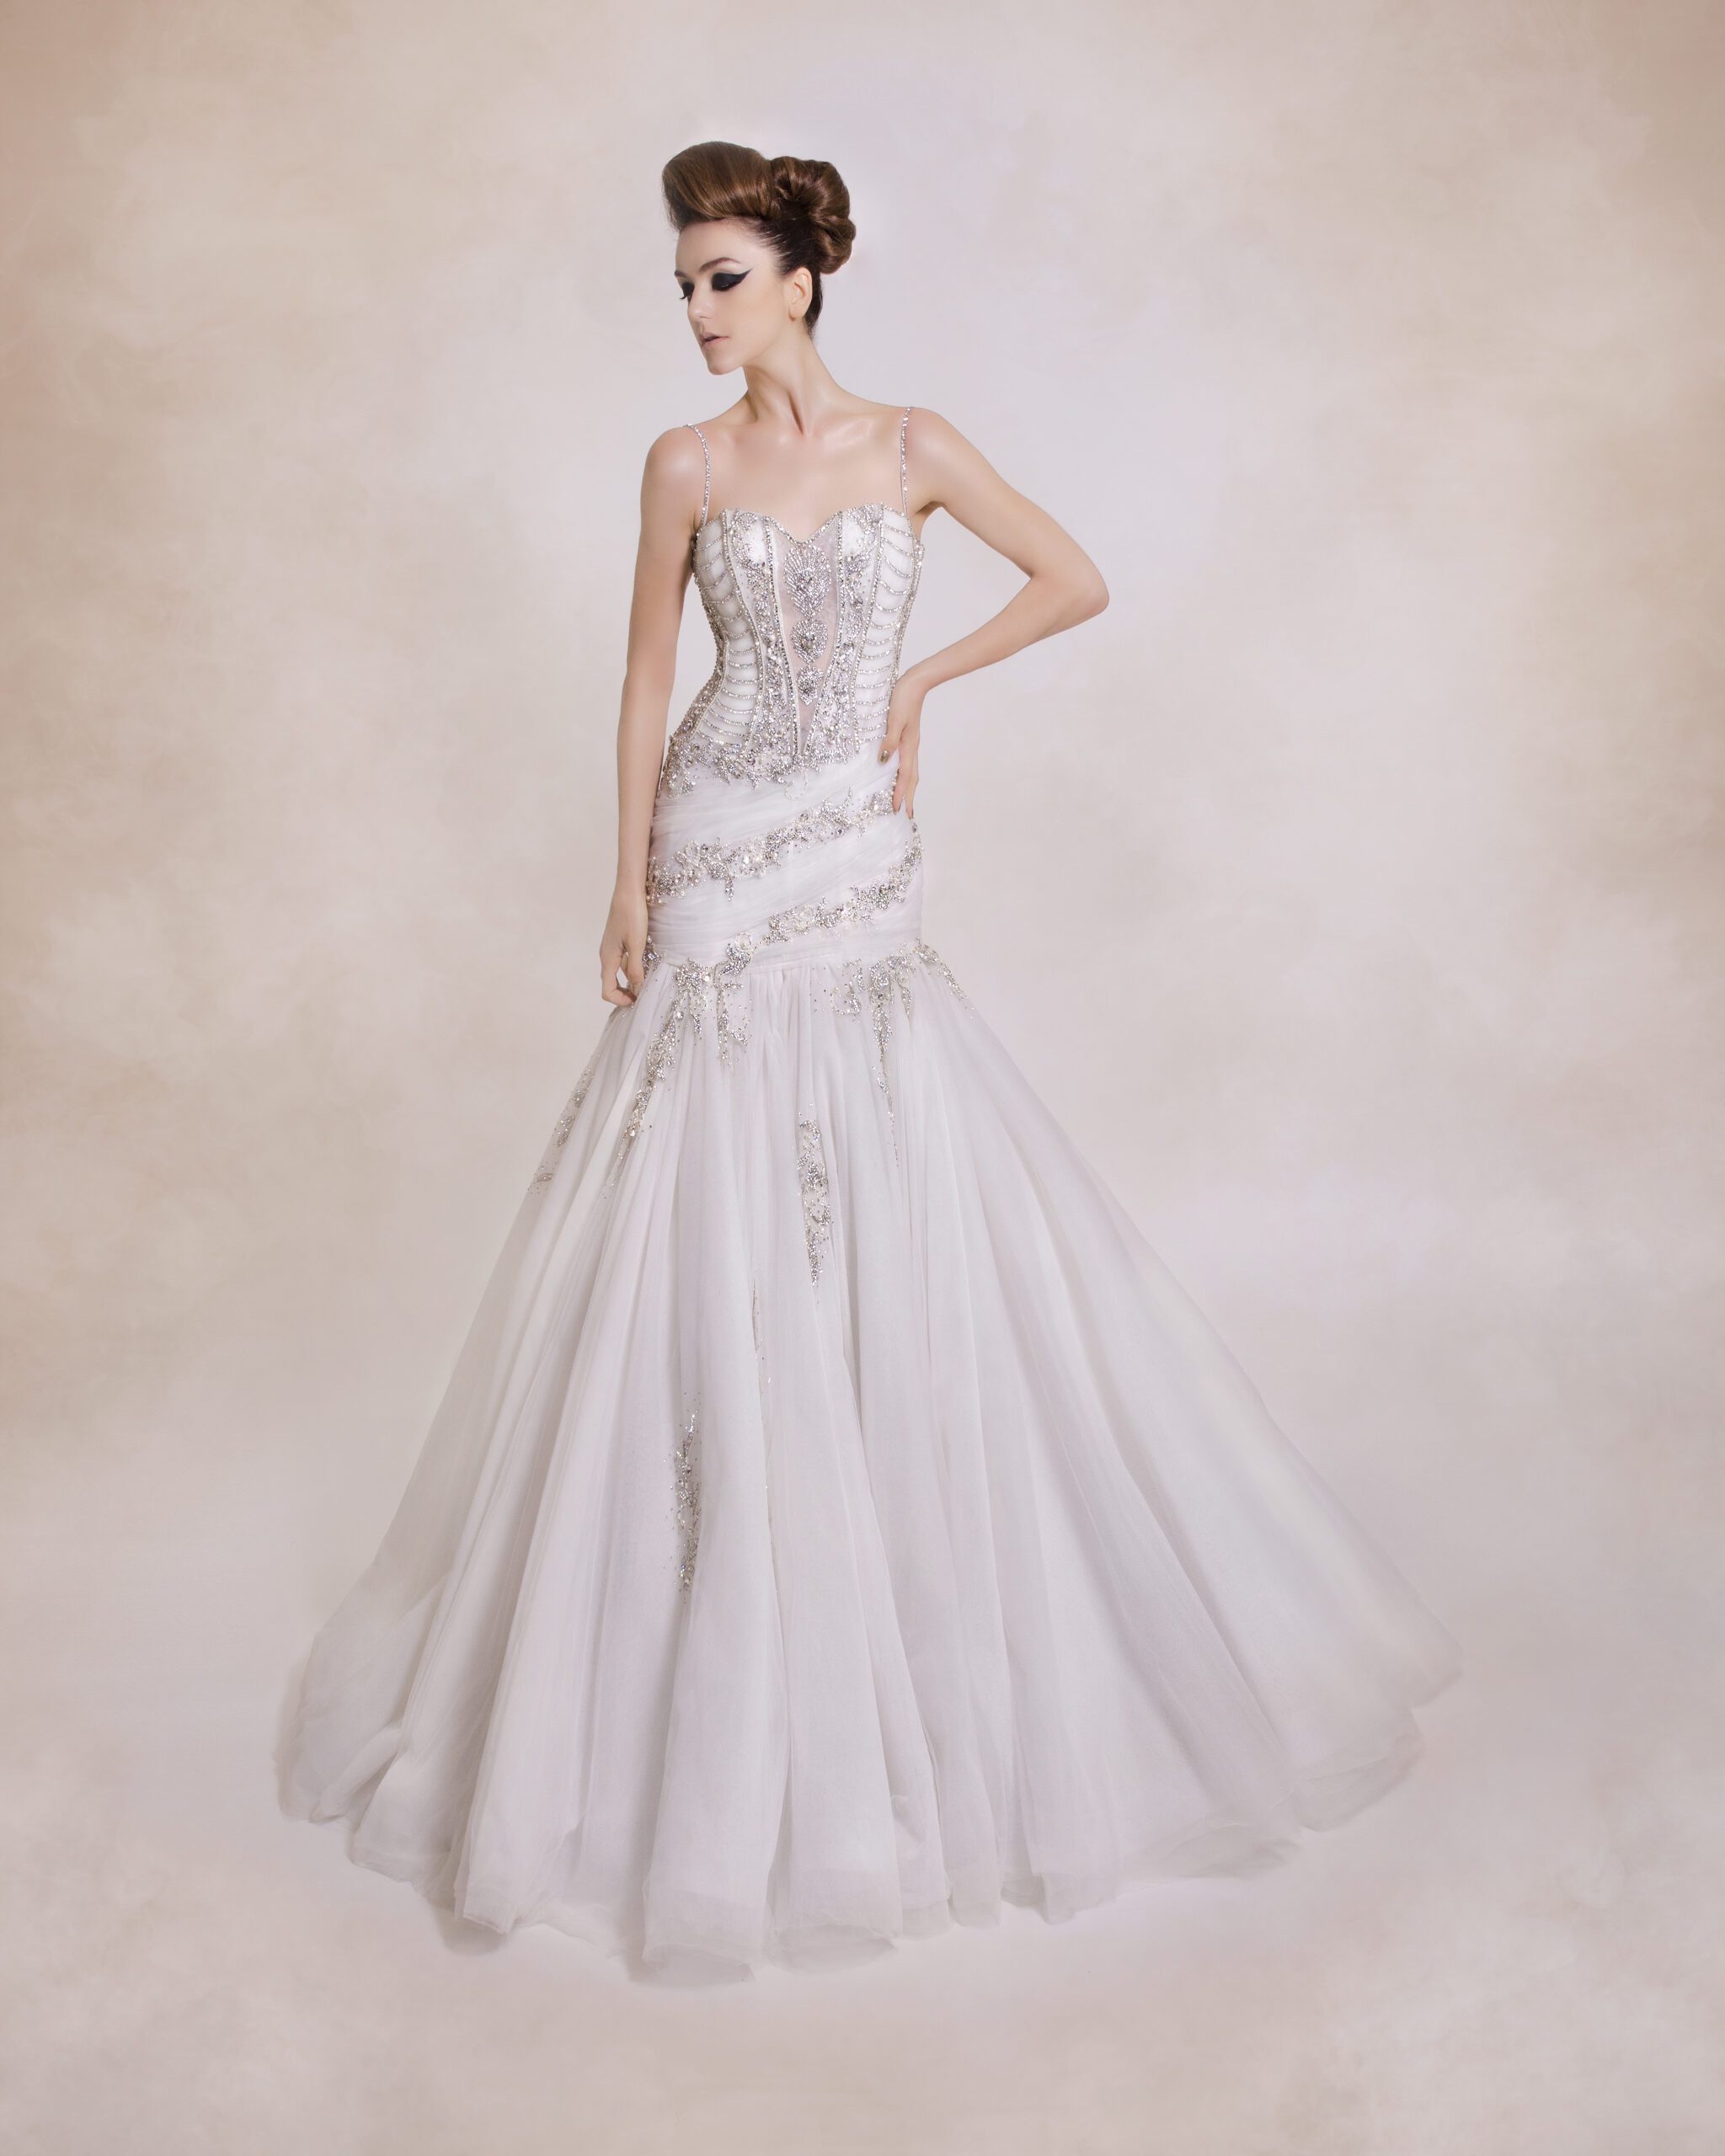 fashion atelier by darsara DSC 1925e scaled Stunning bridal and wedding dresses available for rental in Dubai, UAE